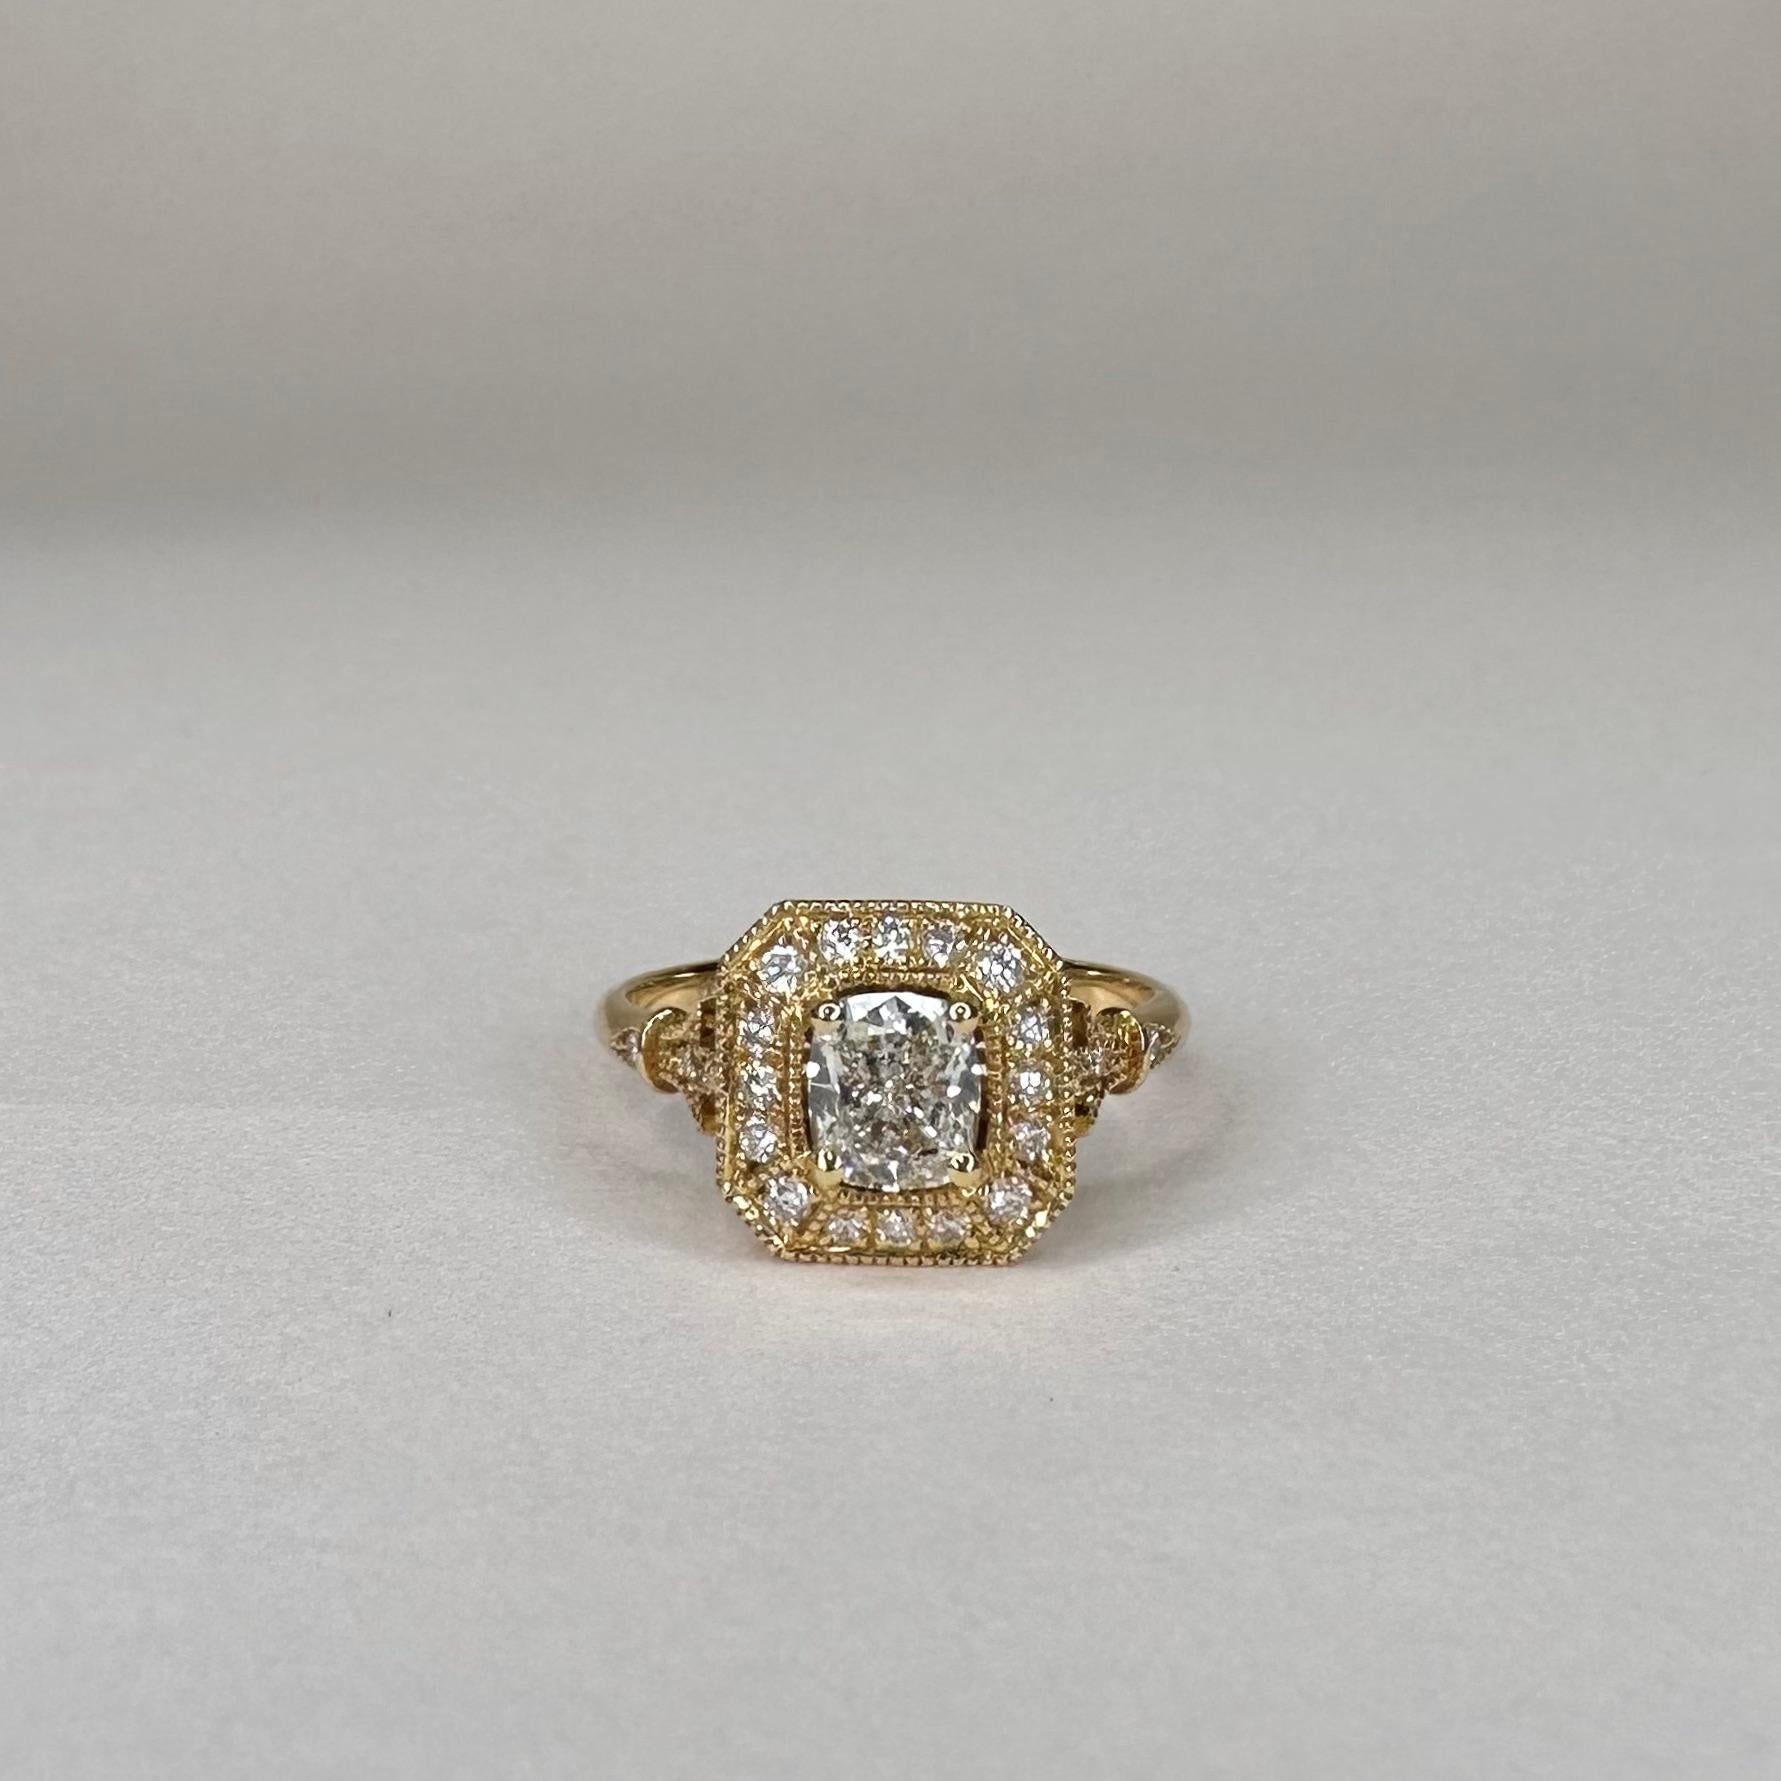 For Sale:  18k Yellow Gold 0.7 Ct Cushion Diamond Ring set with 0.19 Cts of Diamonds 4